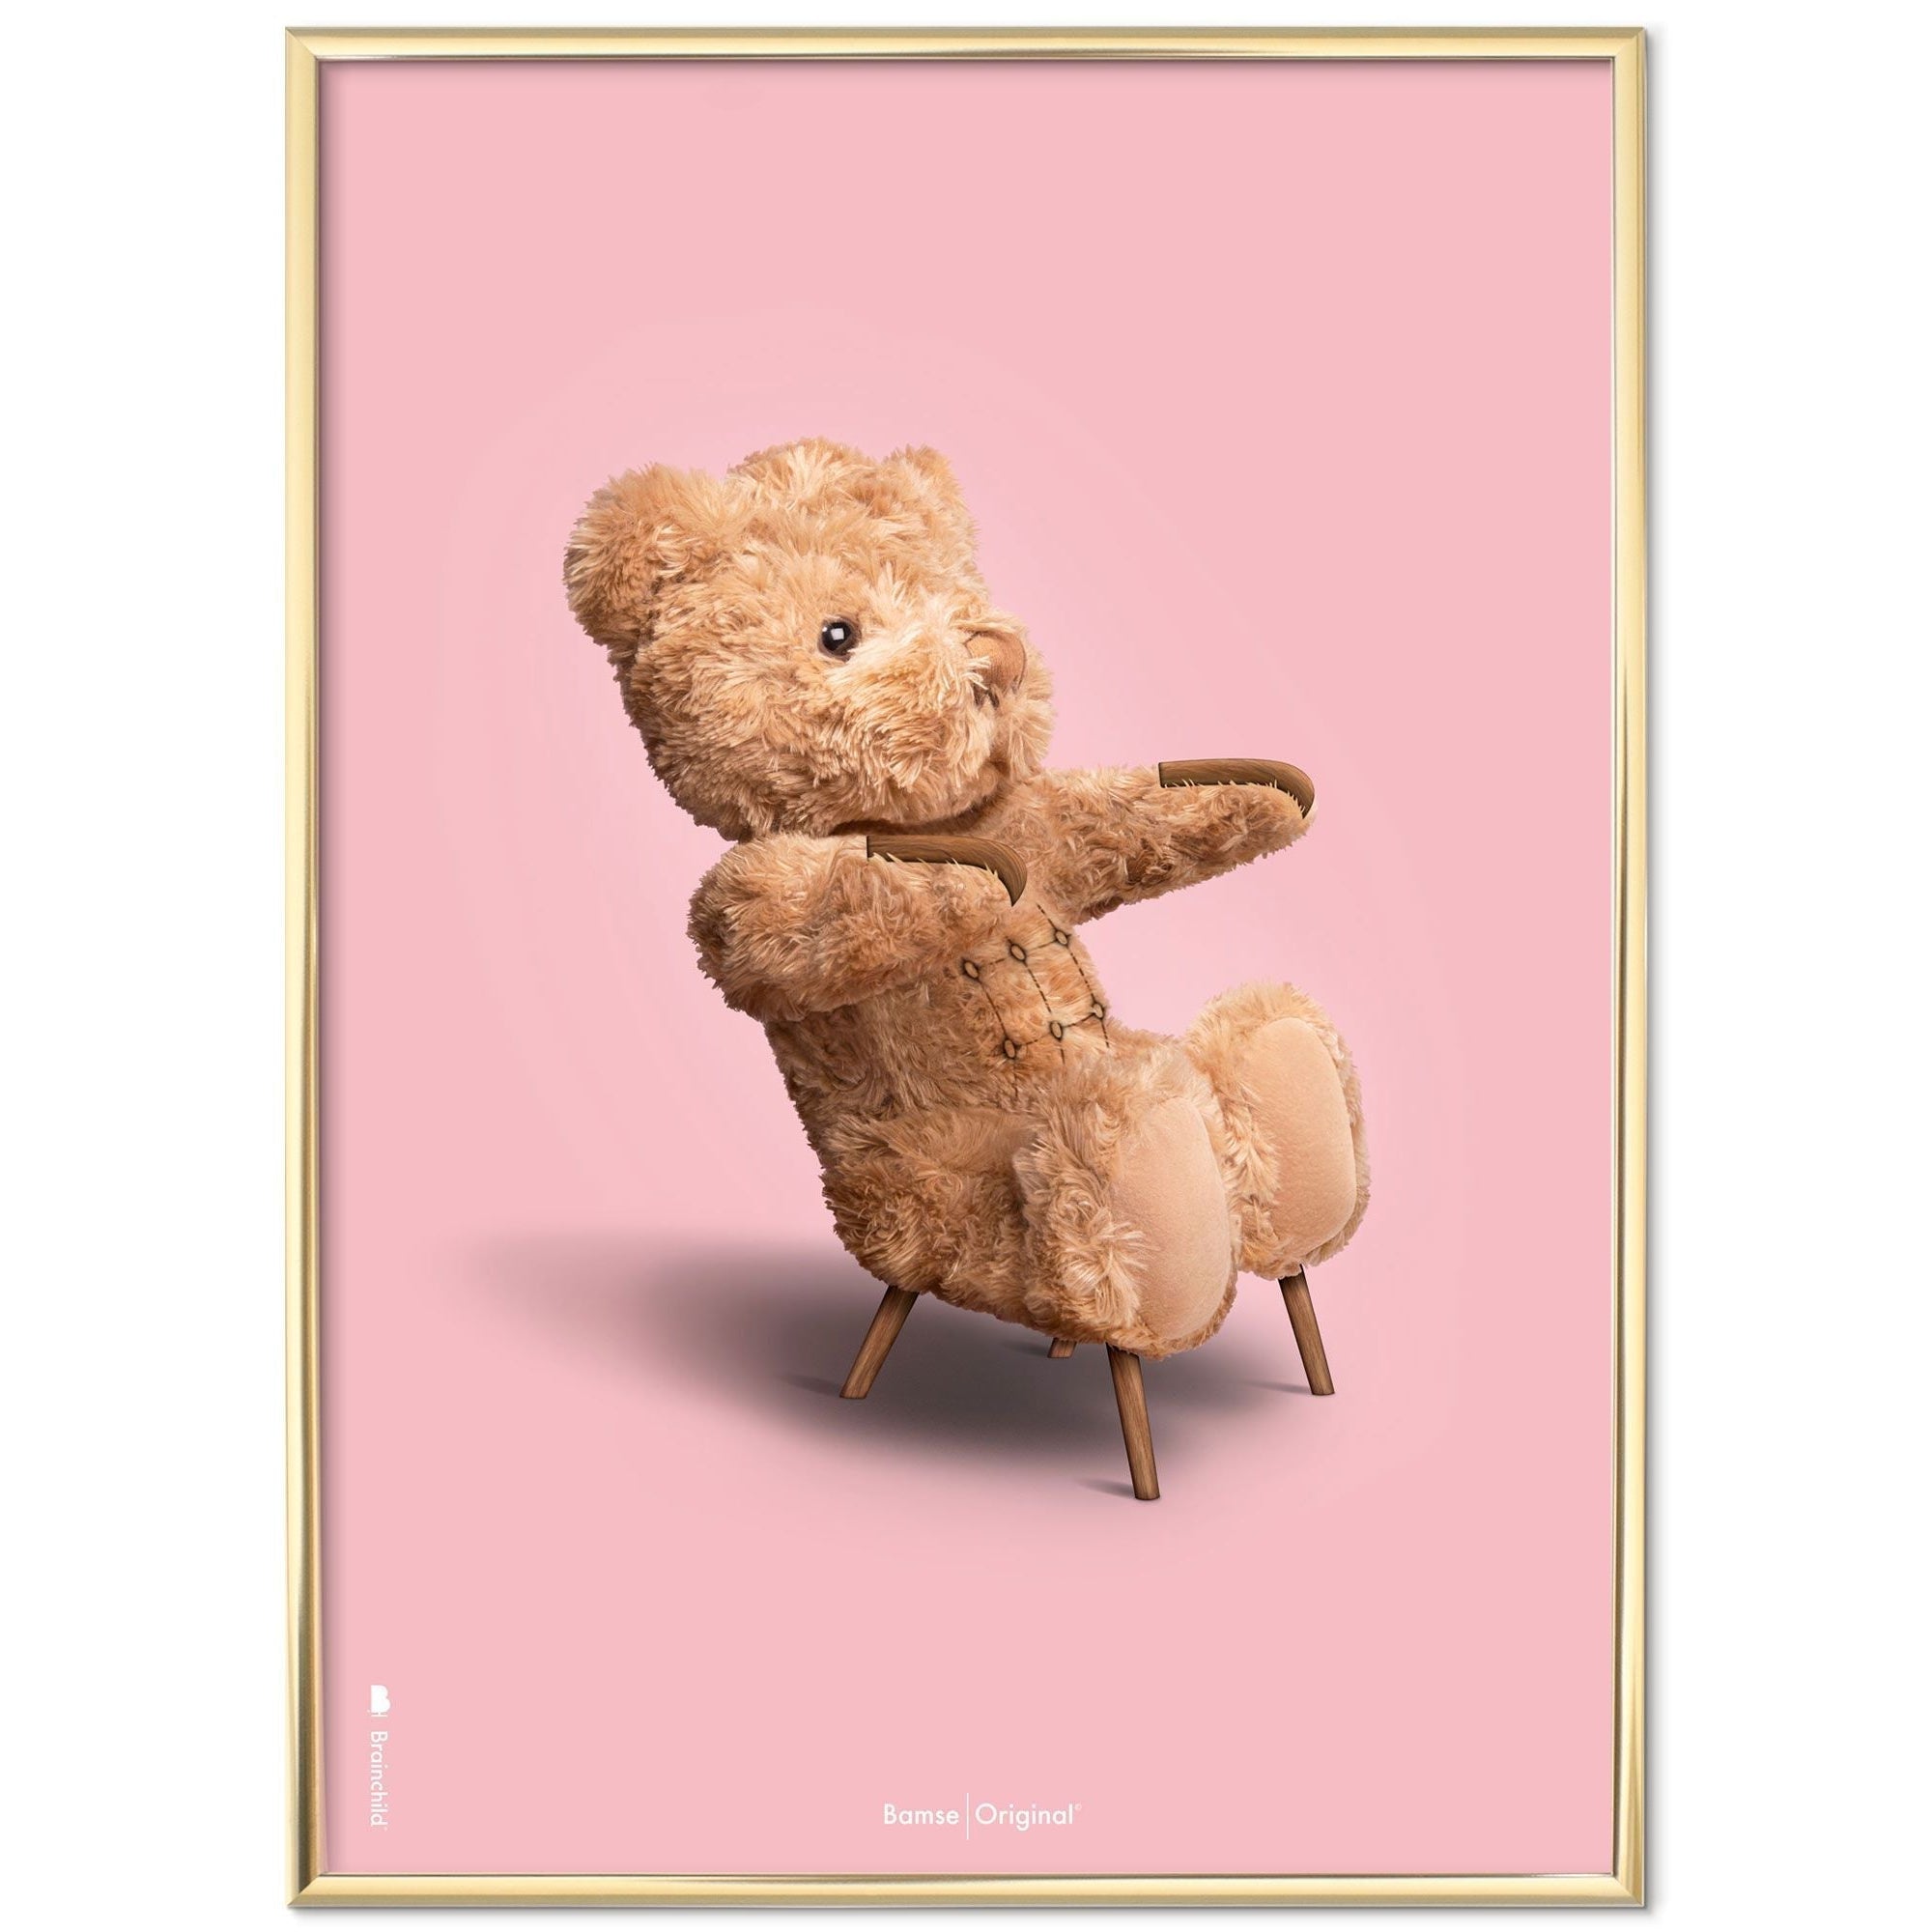 Brainchild Teddy Bear Classic Poster Brass Colored Frame A5, Pink Background